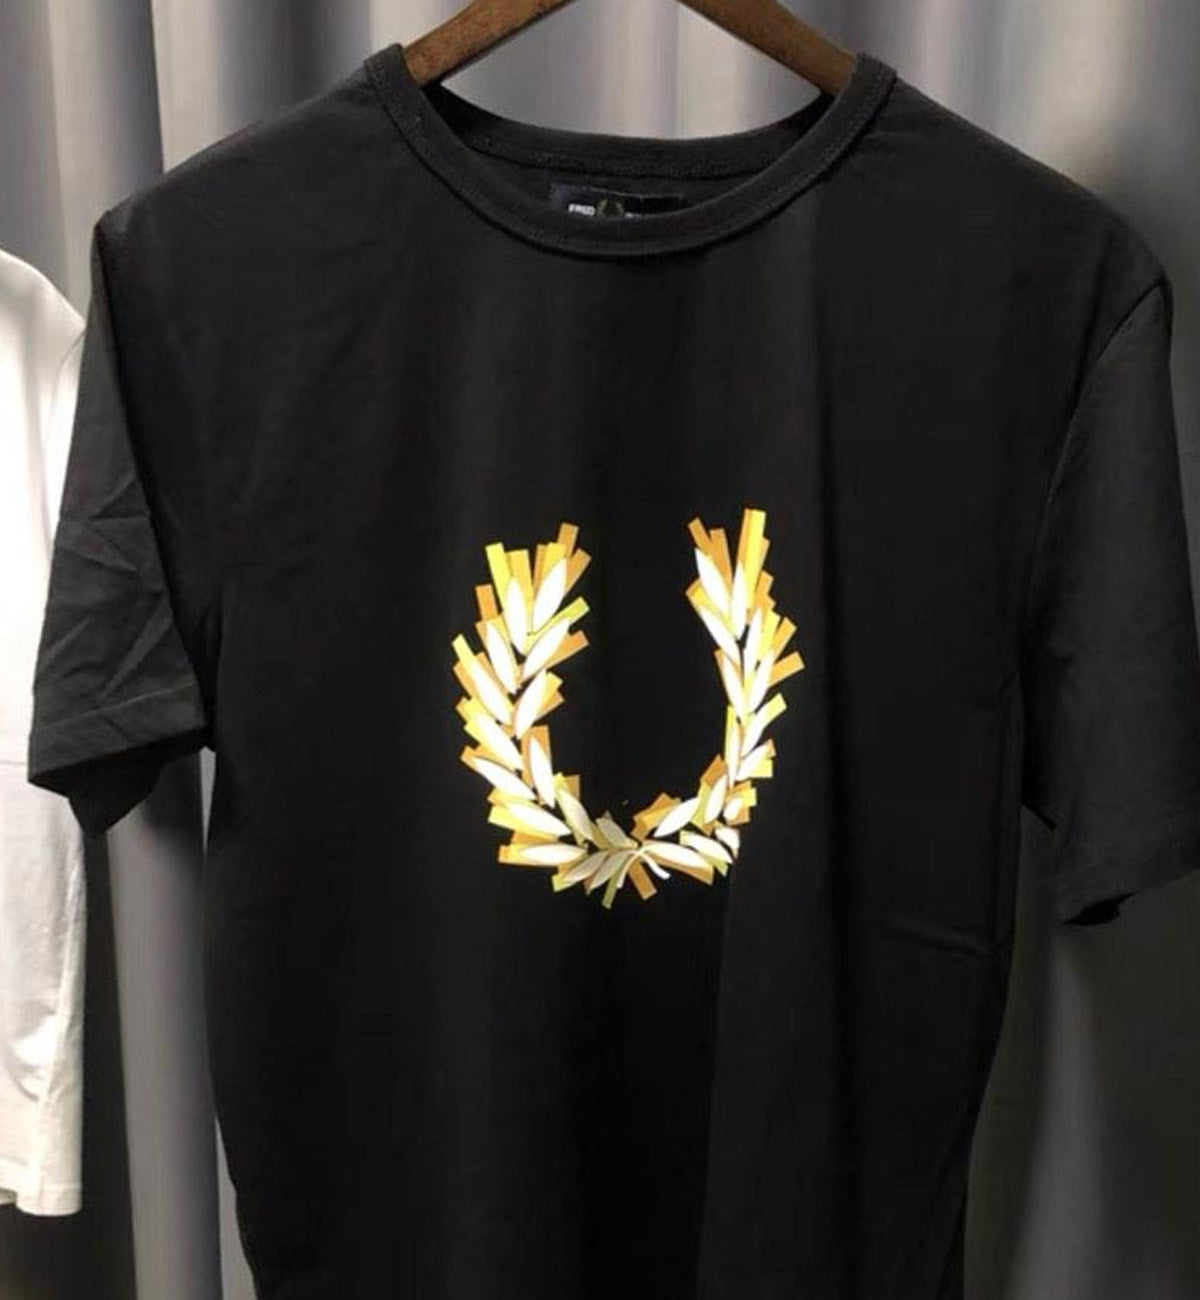 Fred Perry Black Glitched Laurel Wreath Tee (Yellow Logo)